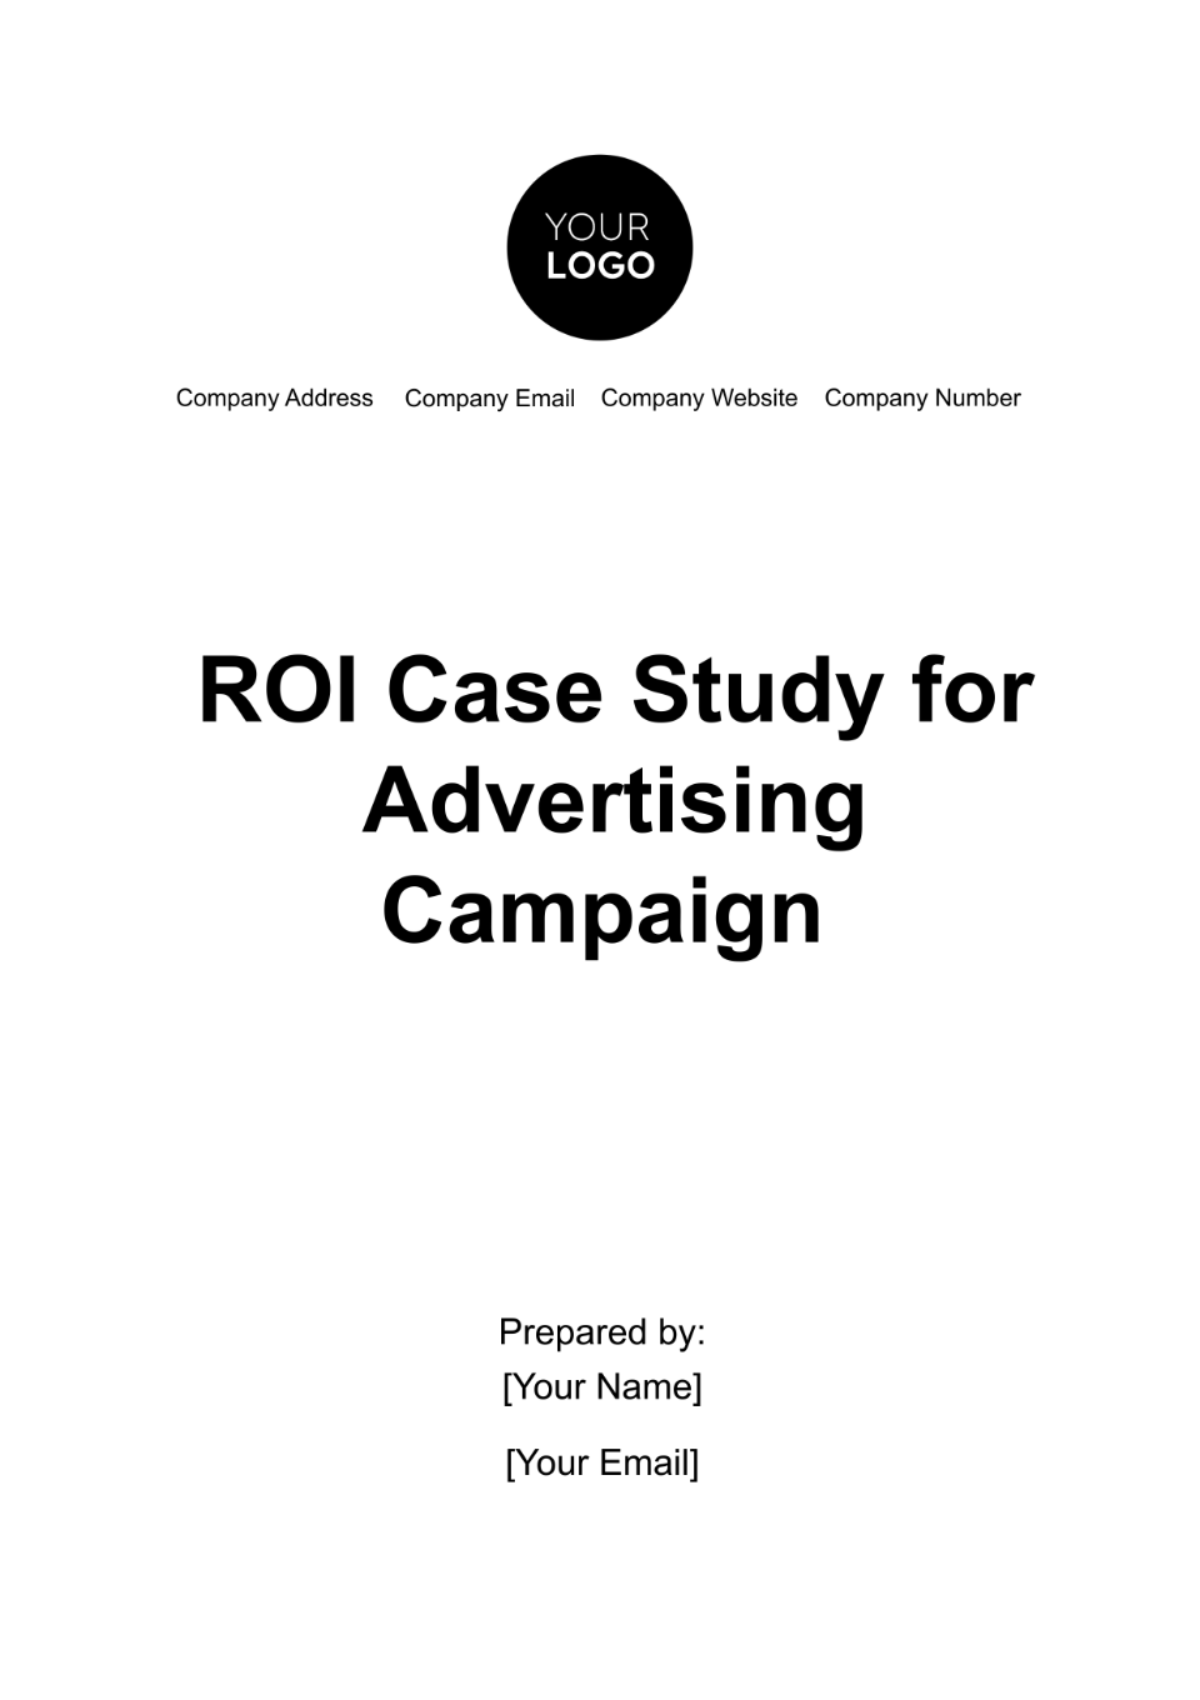 Free ROI Case Study for Advertising Campaign Template